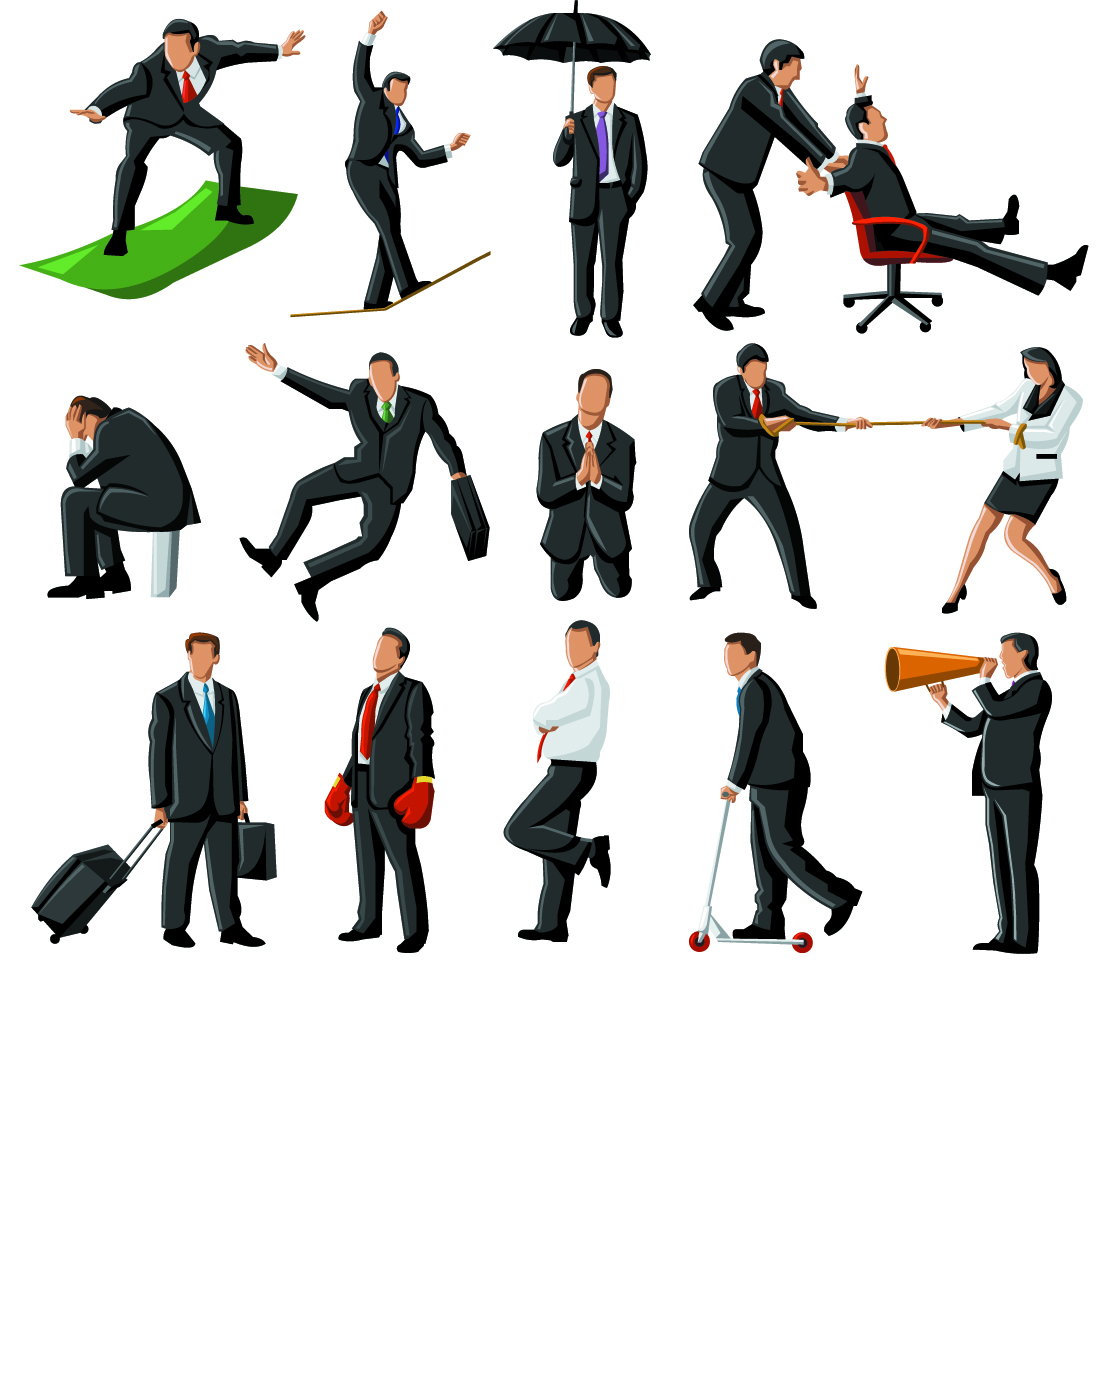 17 Free Vector Business People Clip Art Images